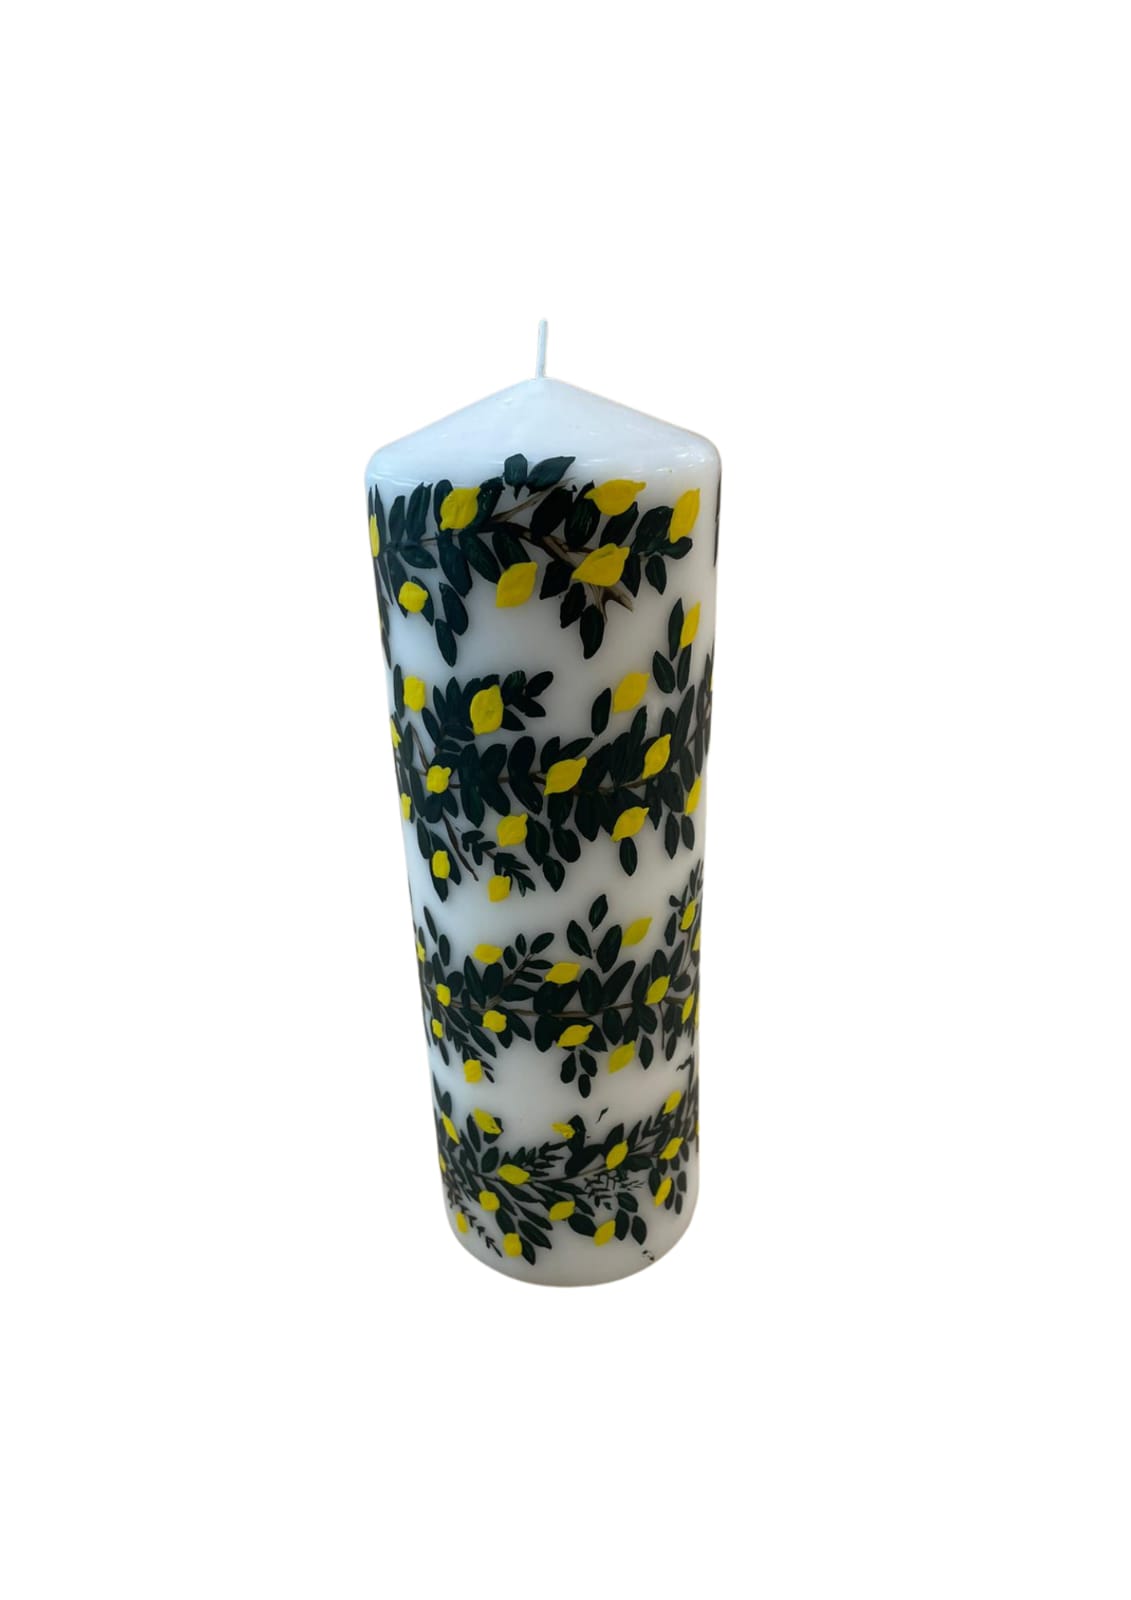 Warehouse Sale - Hand Painted Block Candle